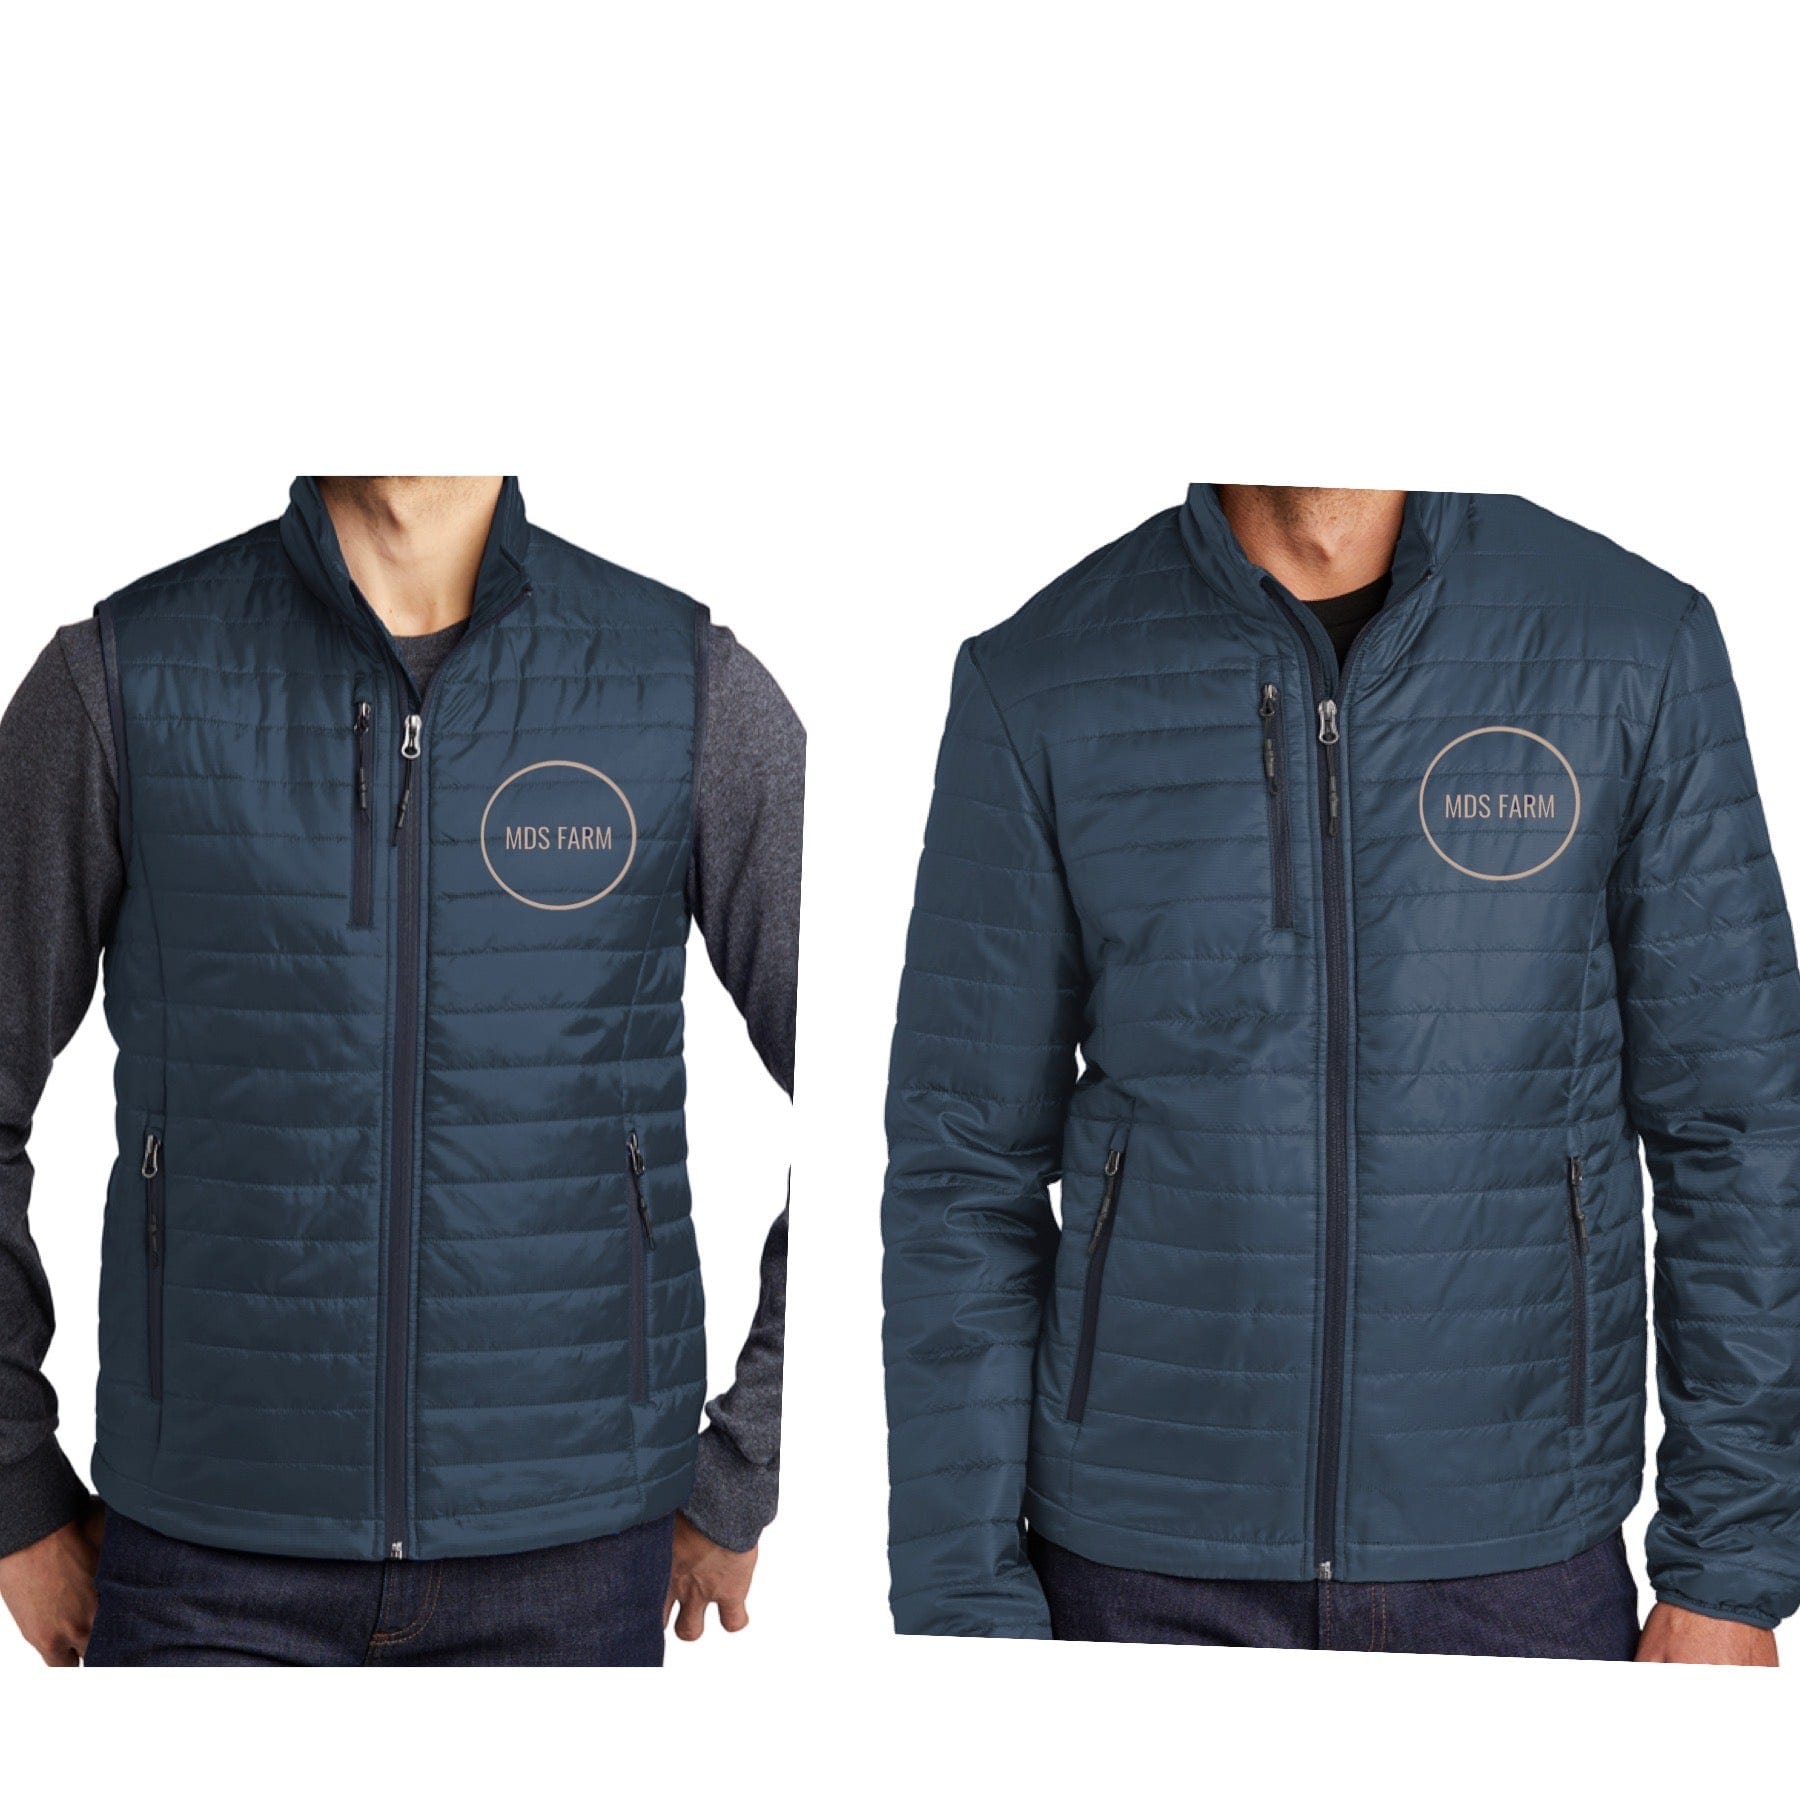 Equestrian Team Apparel MDS Farm Men's Puffy Vest and Jacket equestrian team apparel online tack store mobile tack store custom farm apparel custom show stable clothing equestrian lifestyle horse show clothing riding clothes horses equestrian tack store